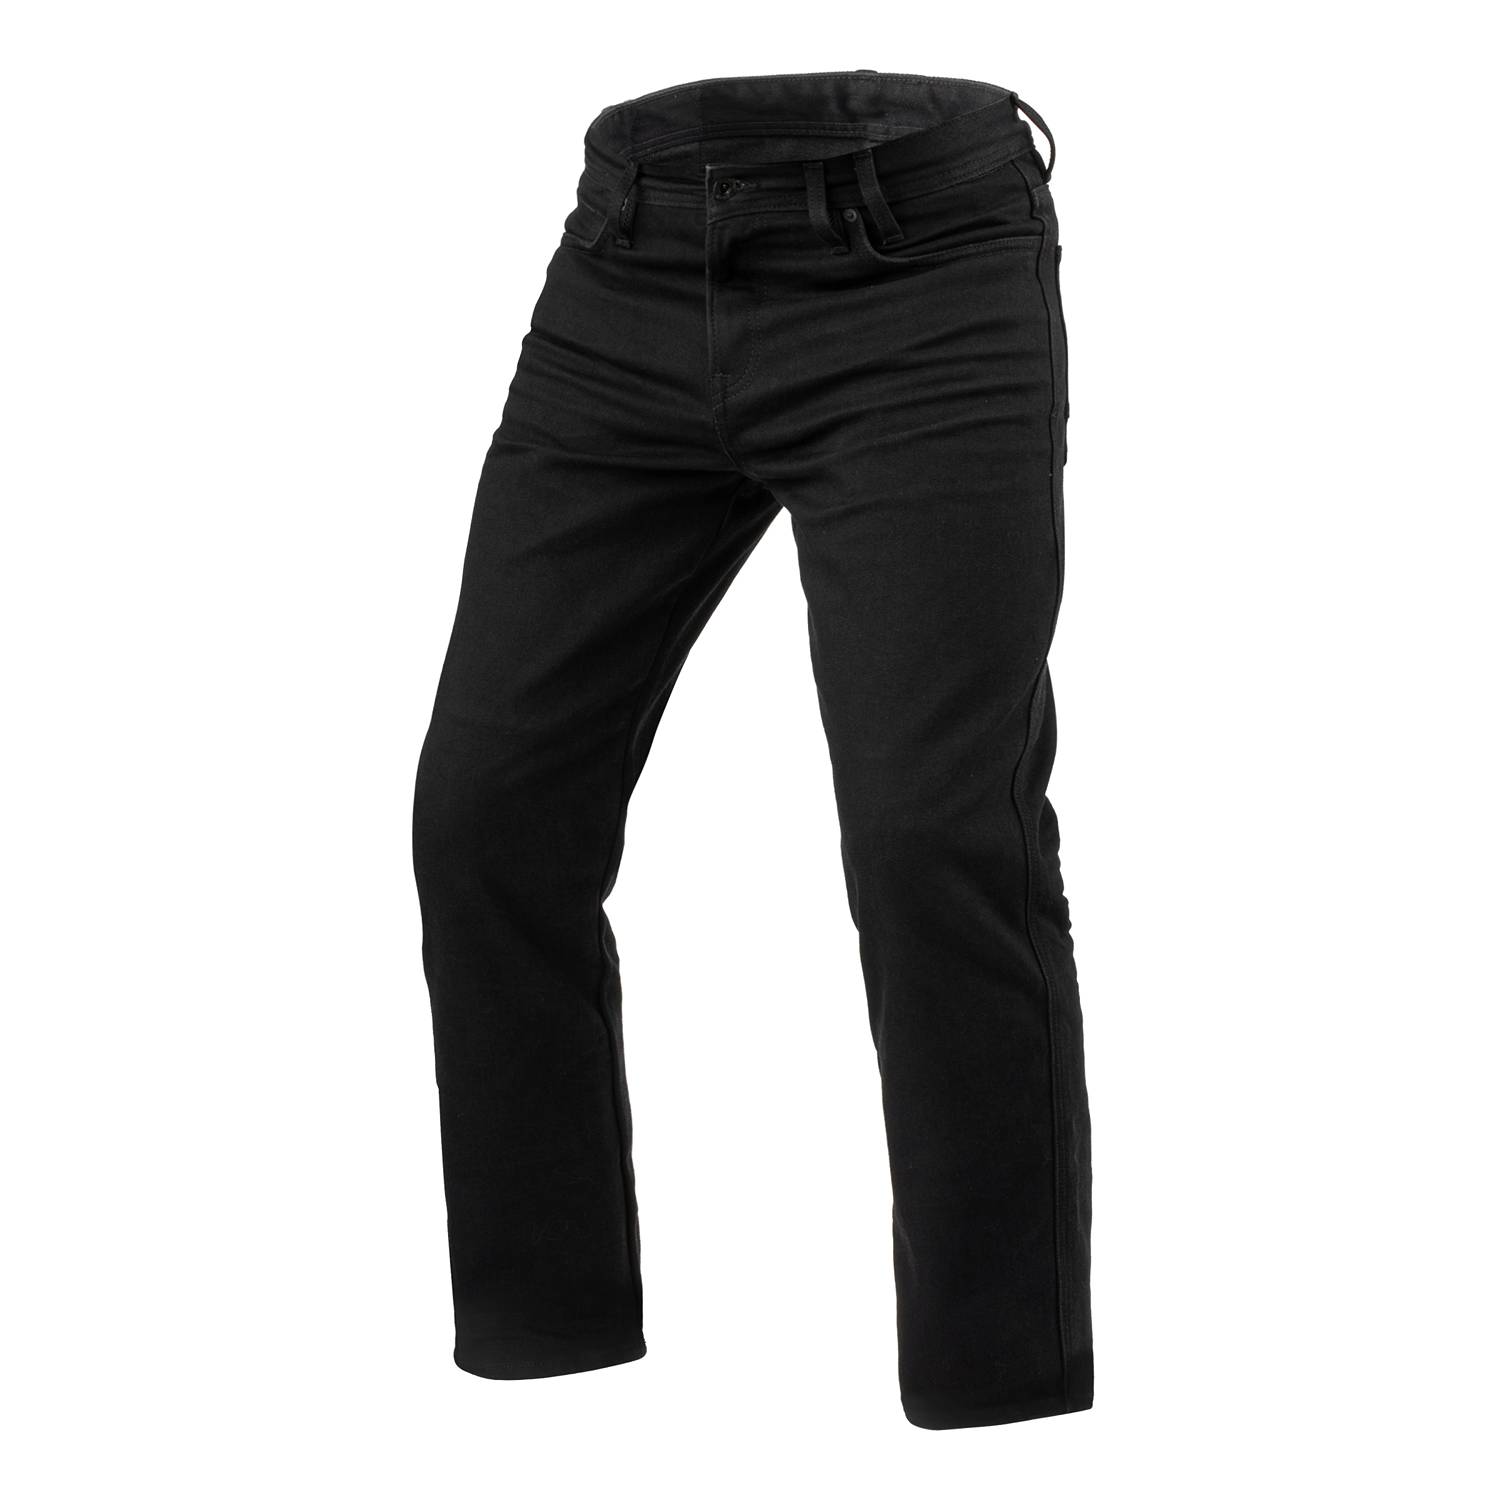 Image of EU REV'IT! Jeans Lombard 3 RF Black L32 Motorcycle Jeans Taille L32/W33